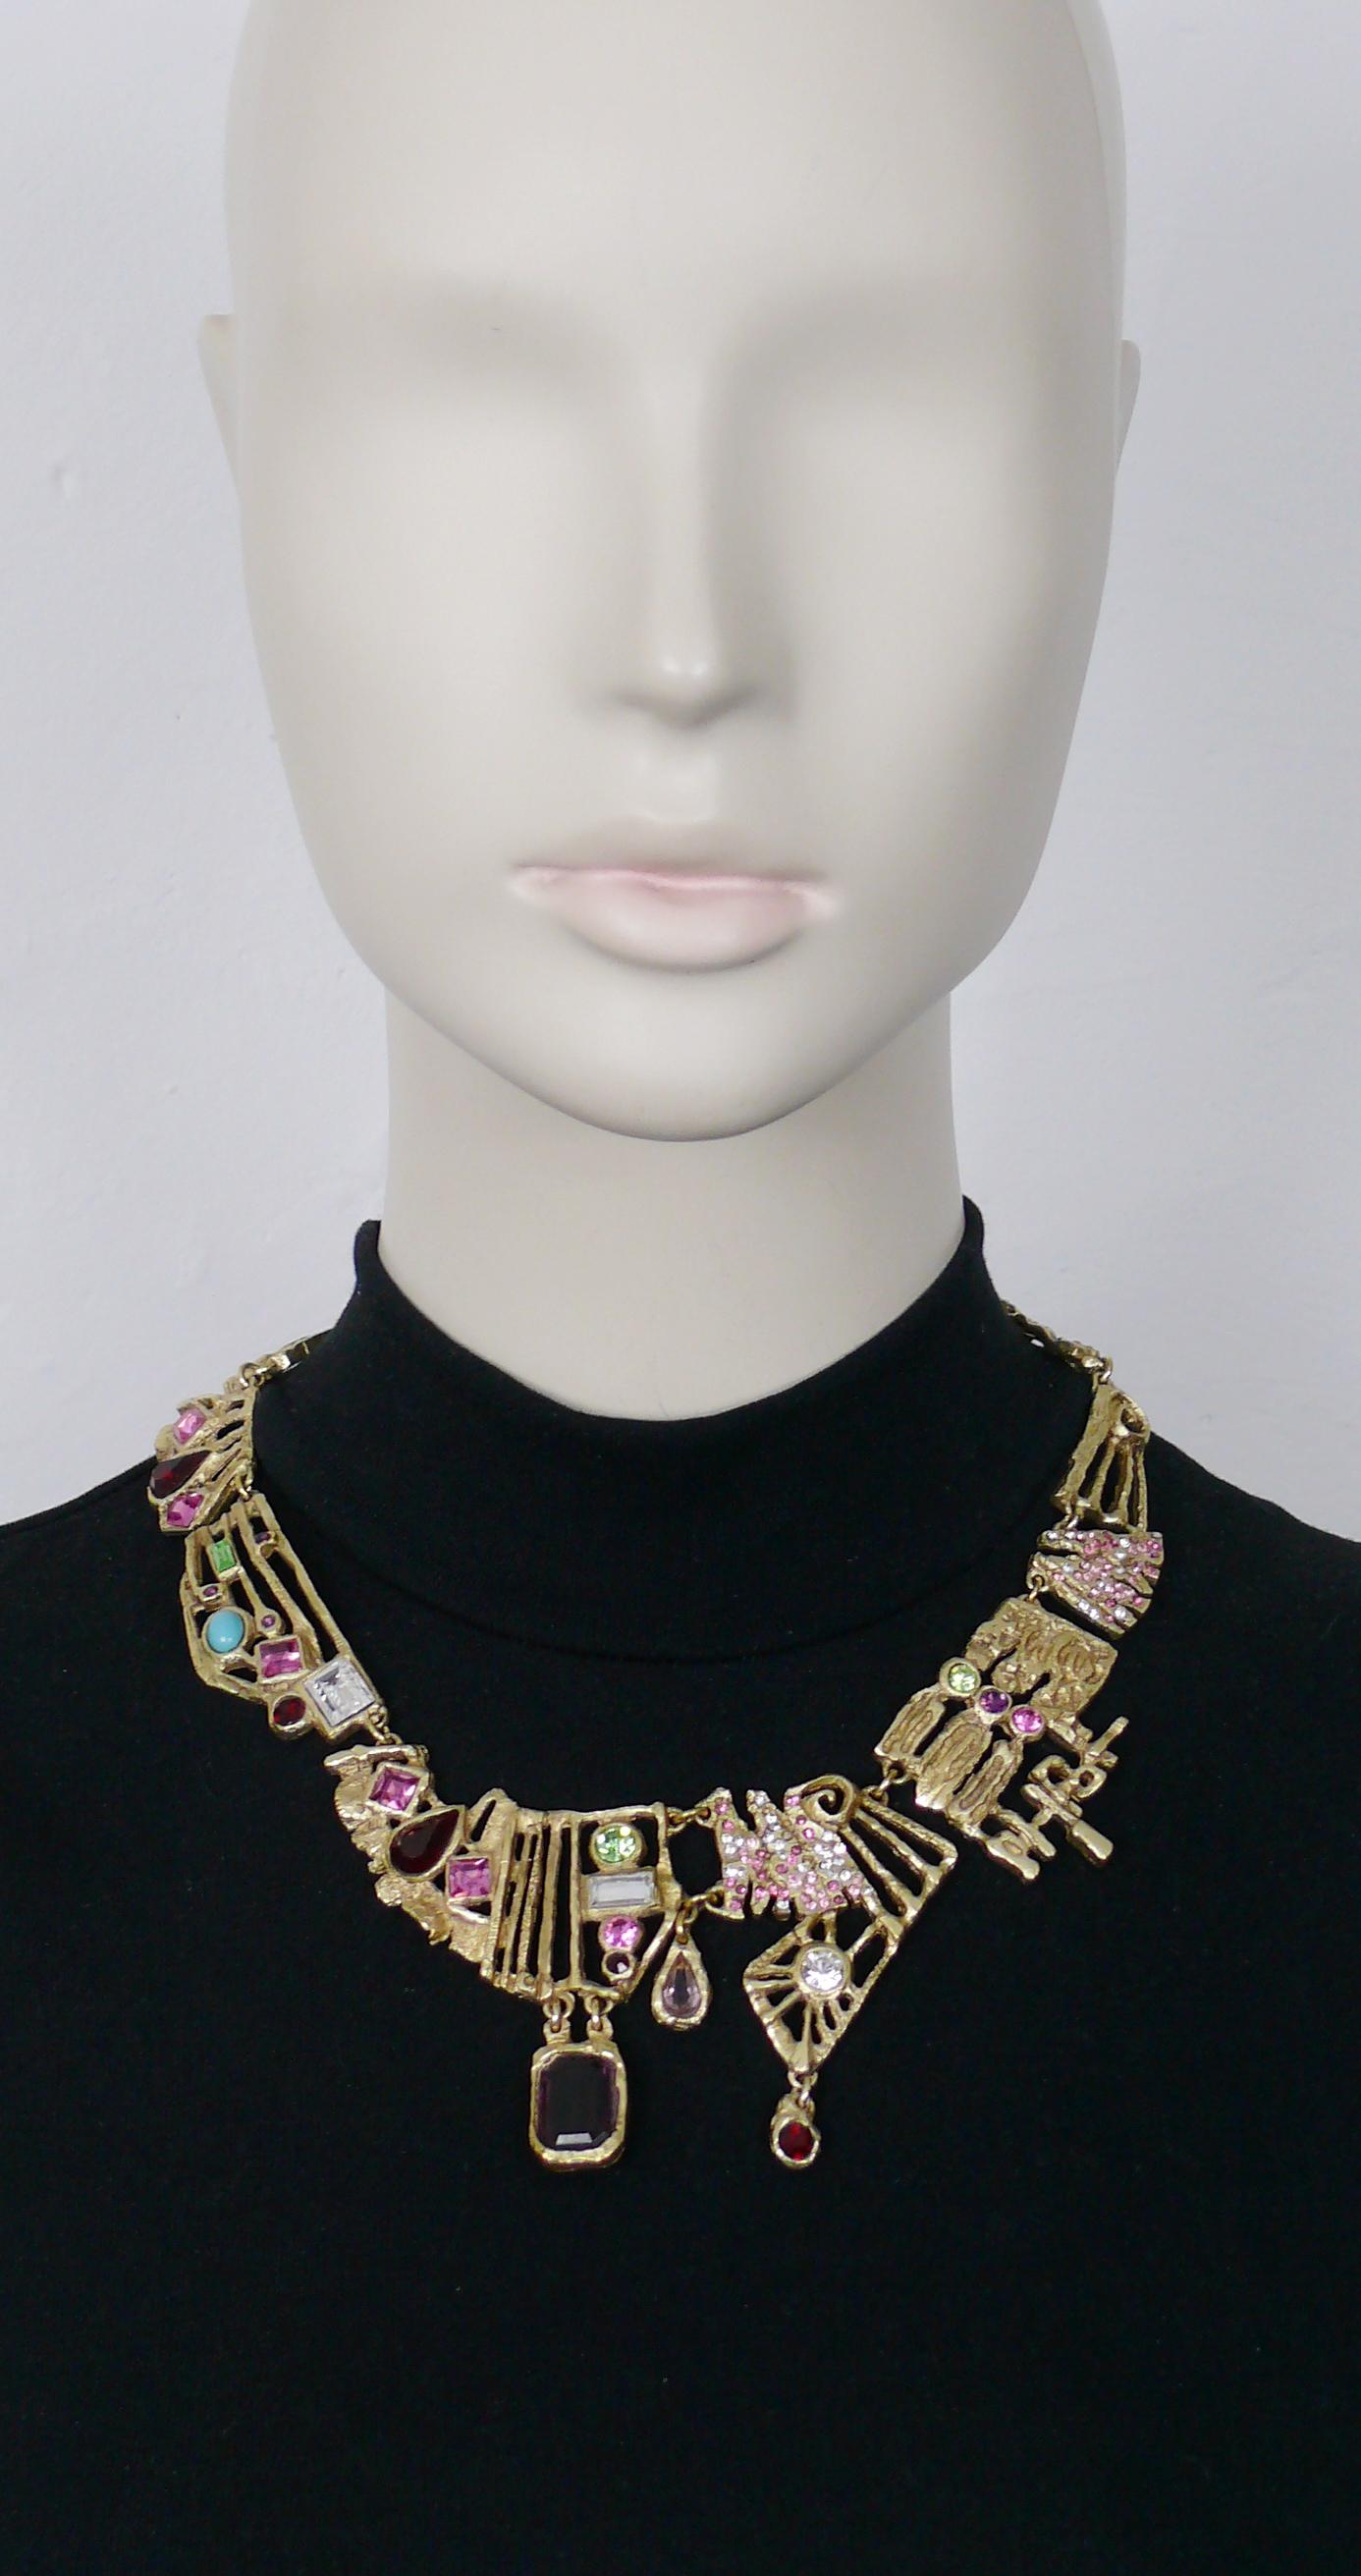 CHRISTIAN LACROIX vintage opulent gold toned openwork brutalist necklace embellished with multicolored crystals and a turquoise colour cabochon.

Adjustable hook closure.

Marked CHRISTIAN LACROIX CL Made in France.

Indicative measurements :